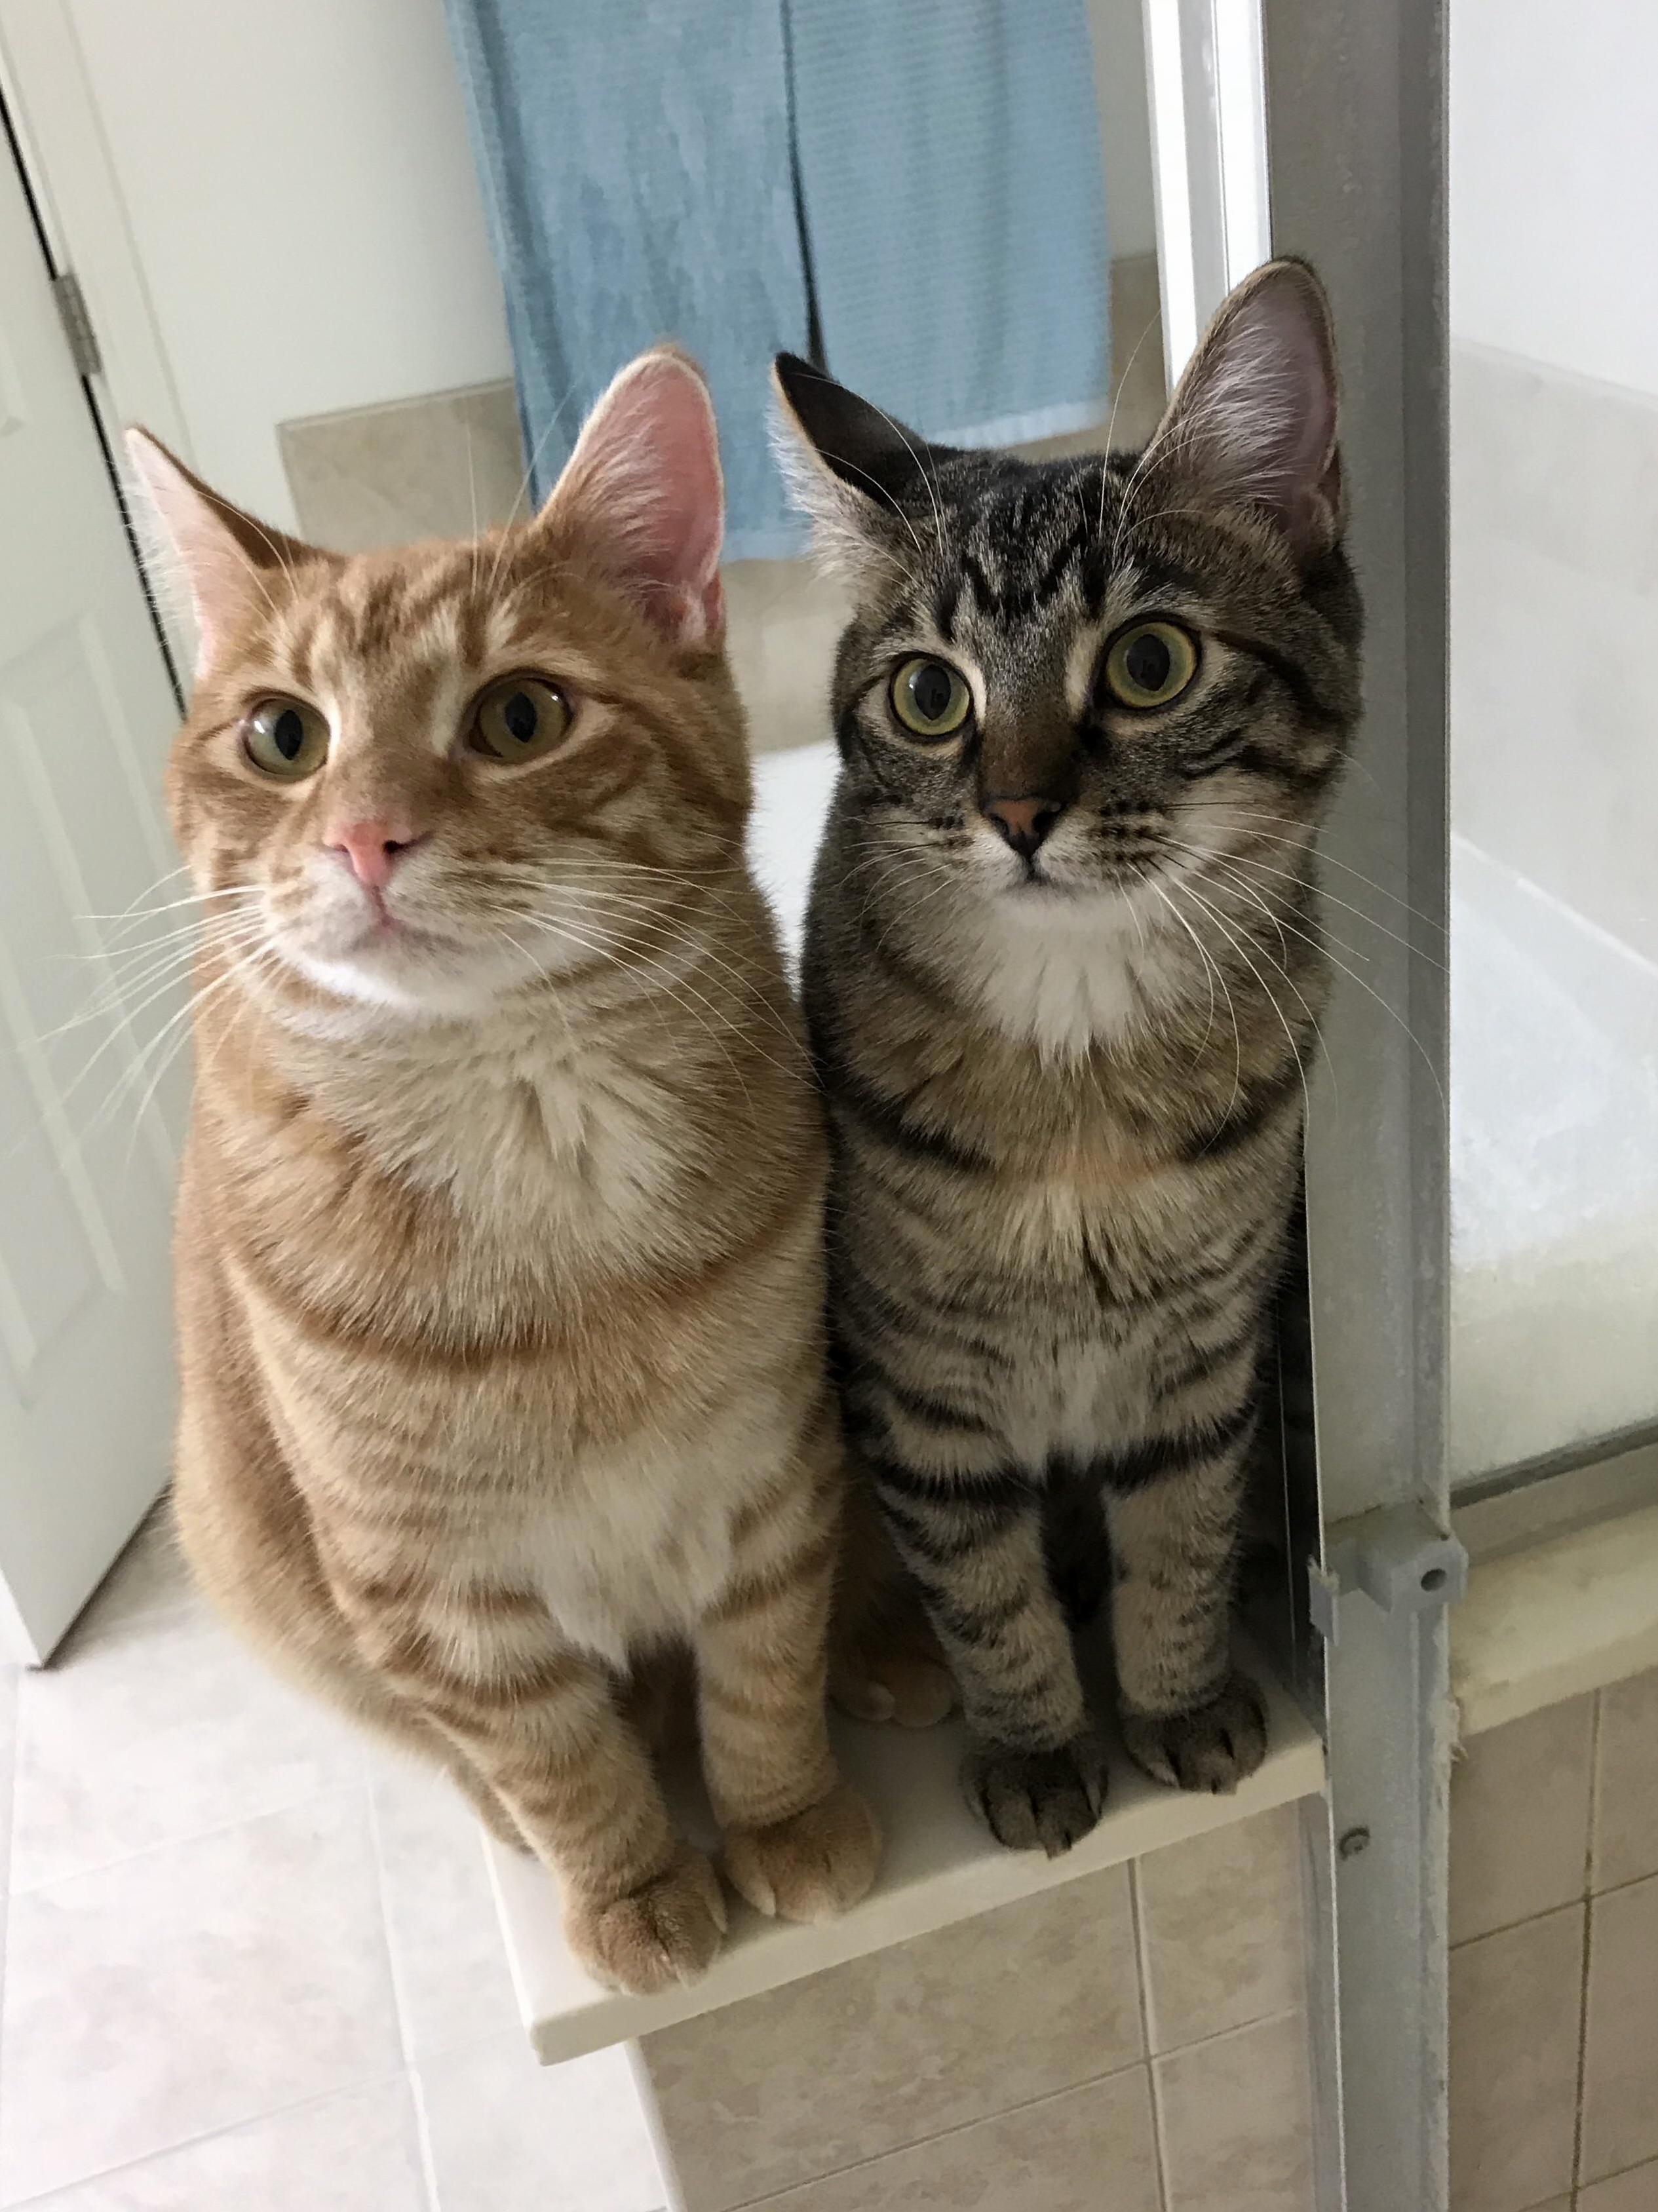 Baguette and rye patiently waiting for me to be done in the shower